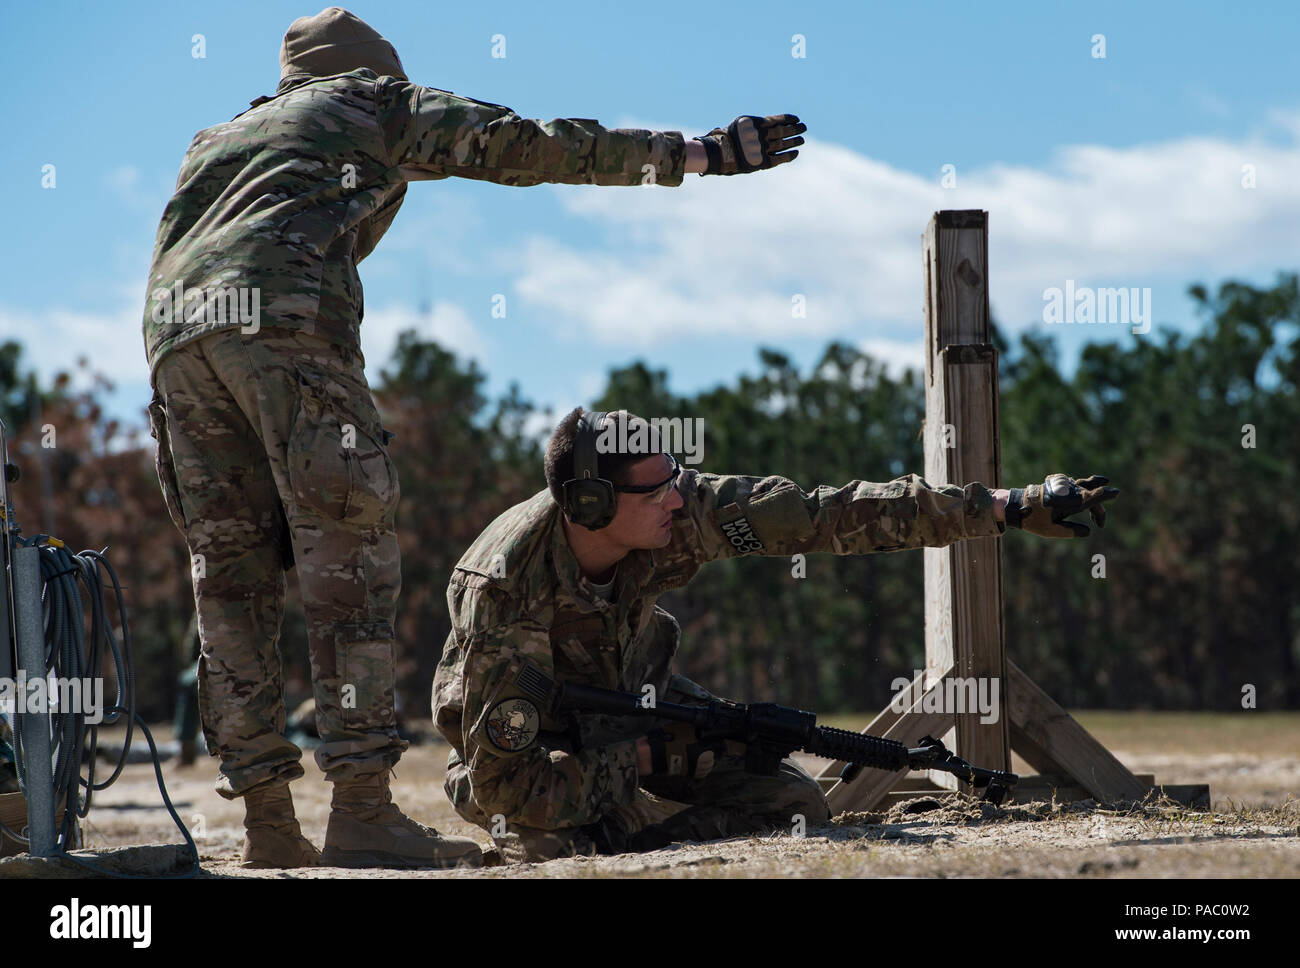 U.S. Air Force Staff Sgt. Sandra Welch, 1st Combat Camera Squadron, combat aerial photojournalist and range safety officer instructs Senior Airmen Nicholas Priest, 1 CTCS Combat broadcaster, during Exercise Scorpion Lens 2016, March 2, 2016, at Fort Jackson, S.C. Exercise Scorpion Lens is an annual Ability To Survive and Operate training evolution mandated by Air Force 3N0XX Job Qualification Standards (3N0XX AFJQS). Individuals are instructed using a 'crawl, walk, run' format of training. The exercise is twofold containing the Scorpion Lens portion, dedicated to Advanced Weapons and Tactical  Stock Photo